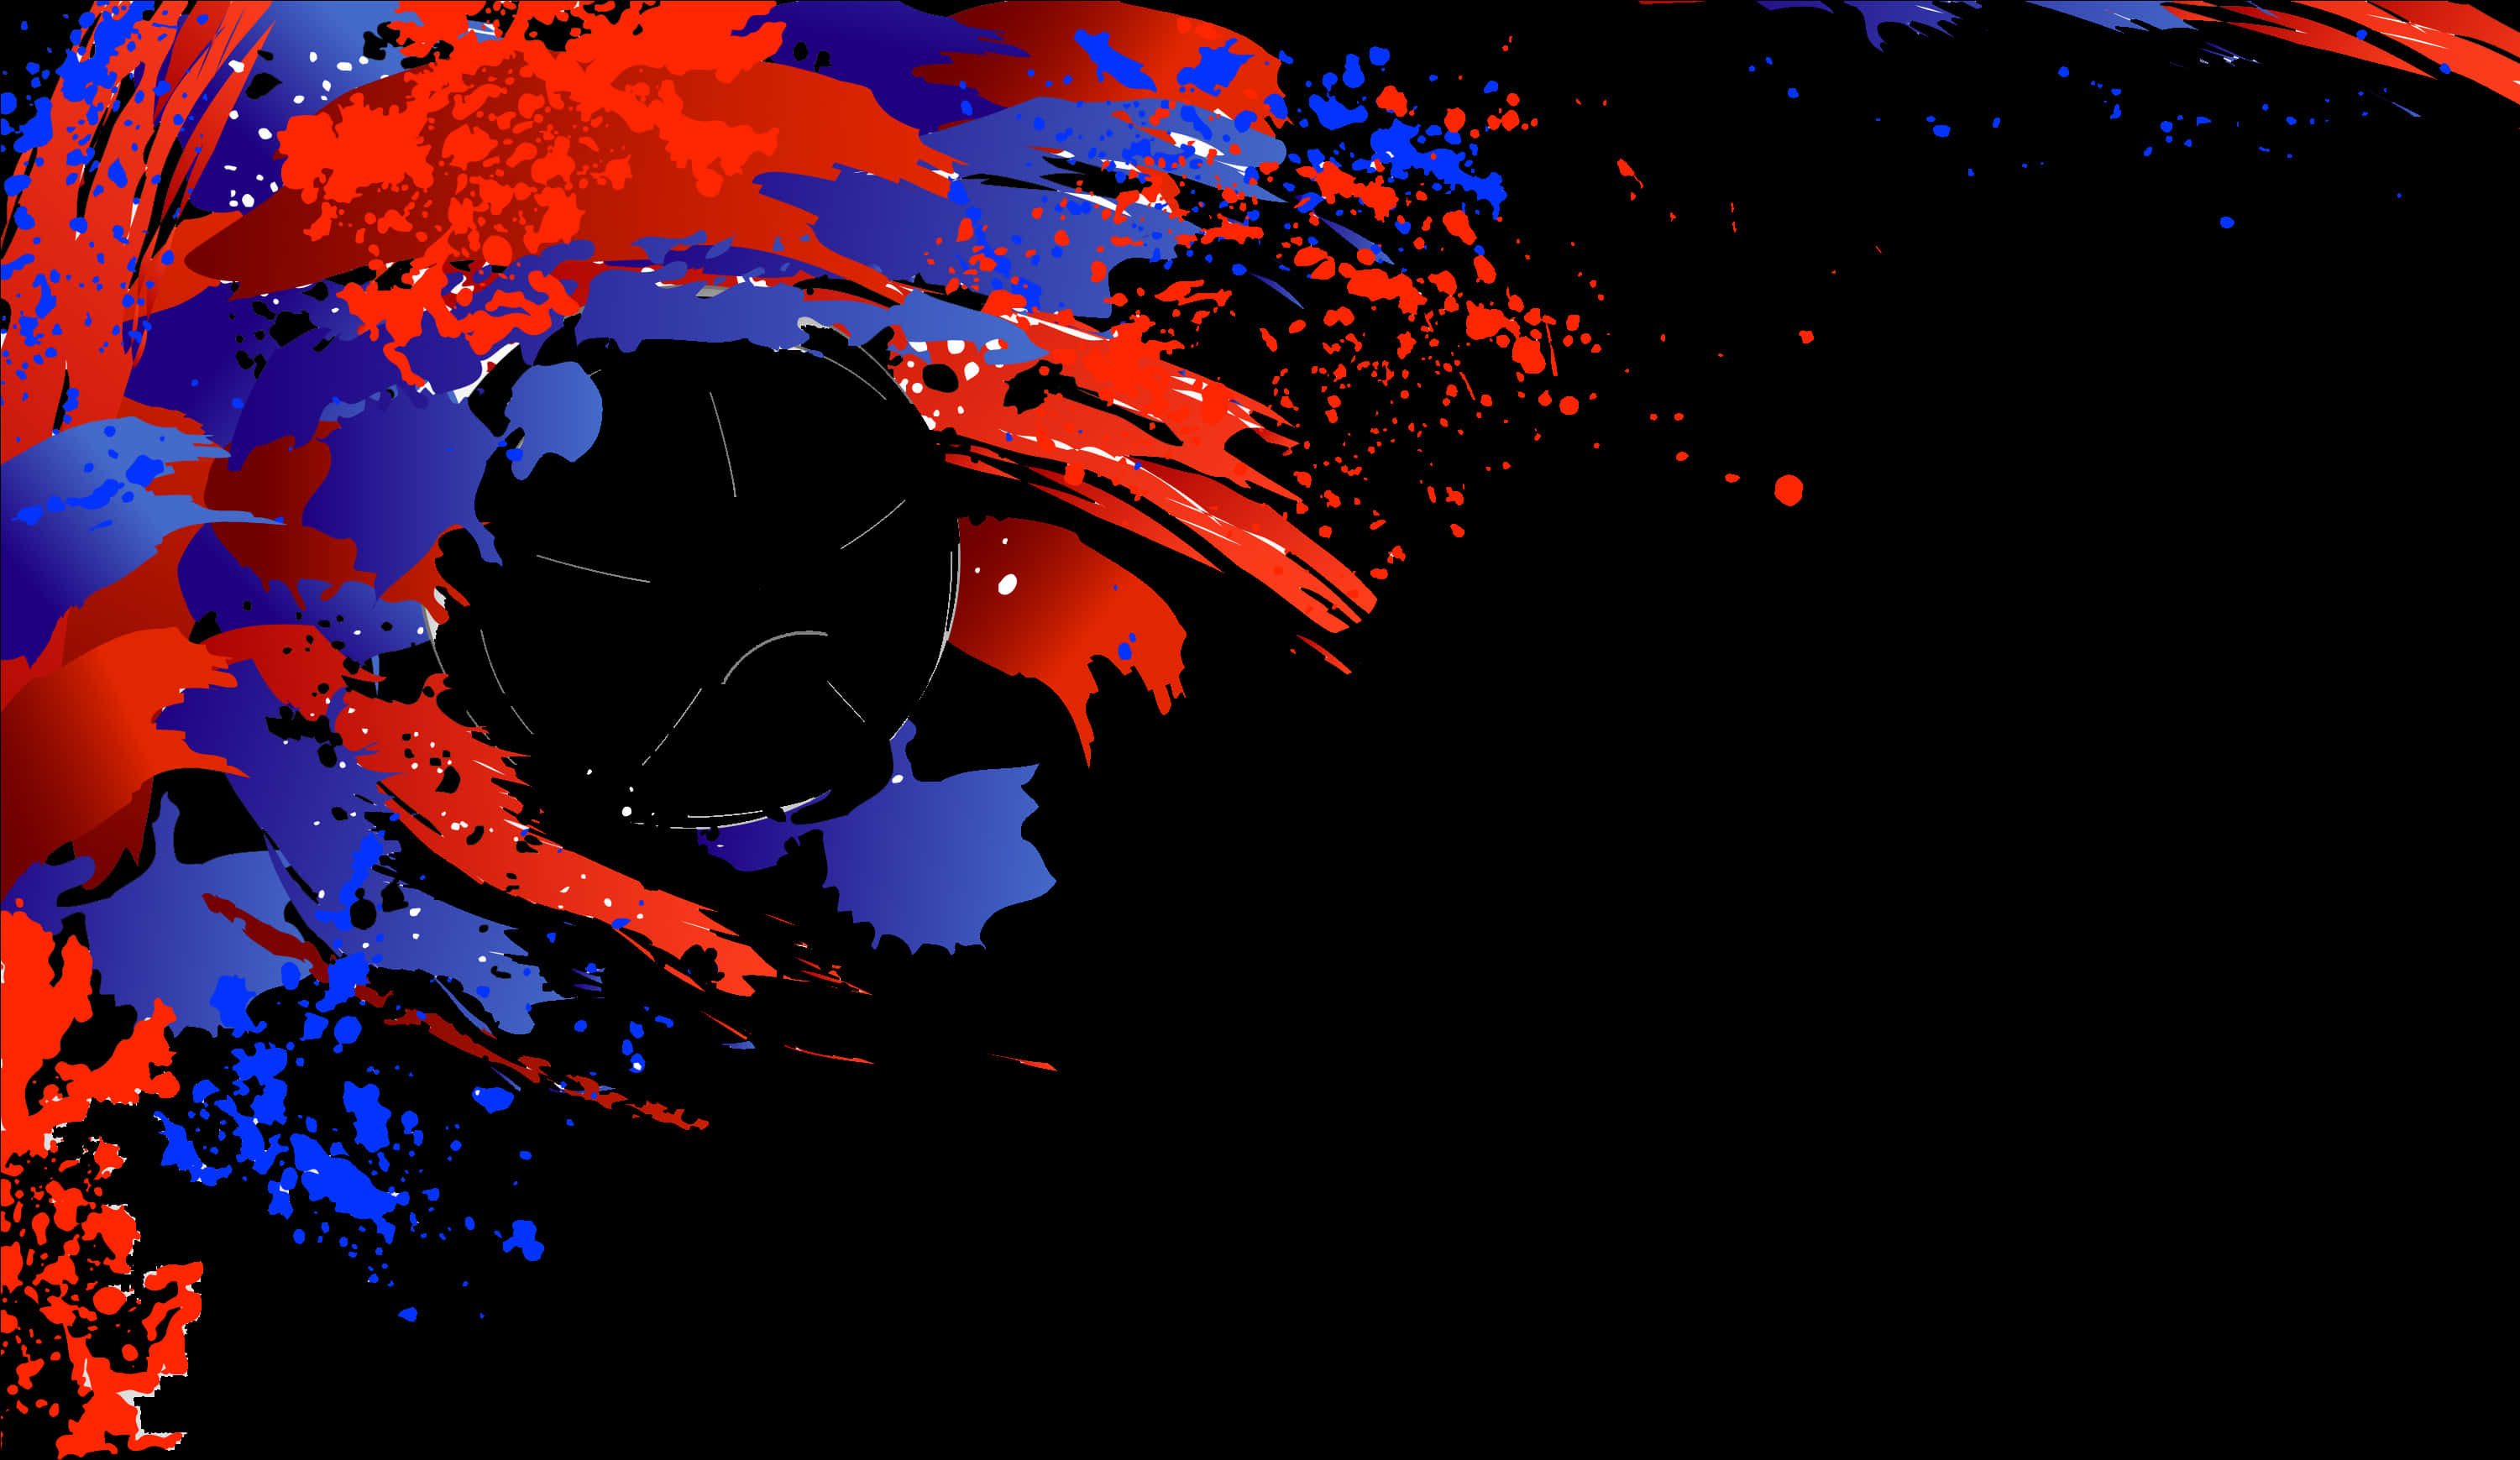 A Red And Blue Paint Splatter On A Black Background